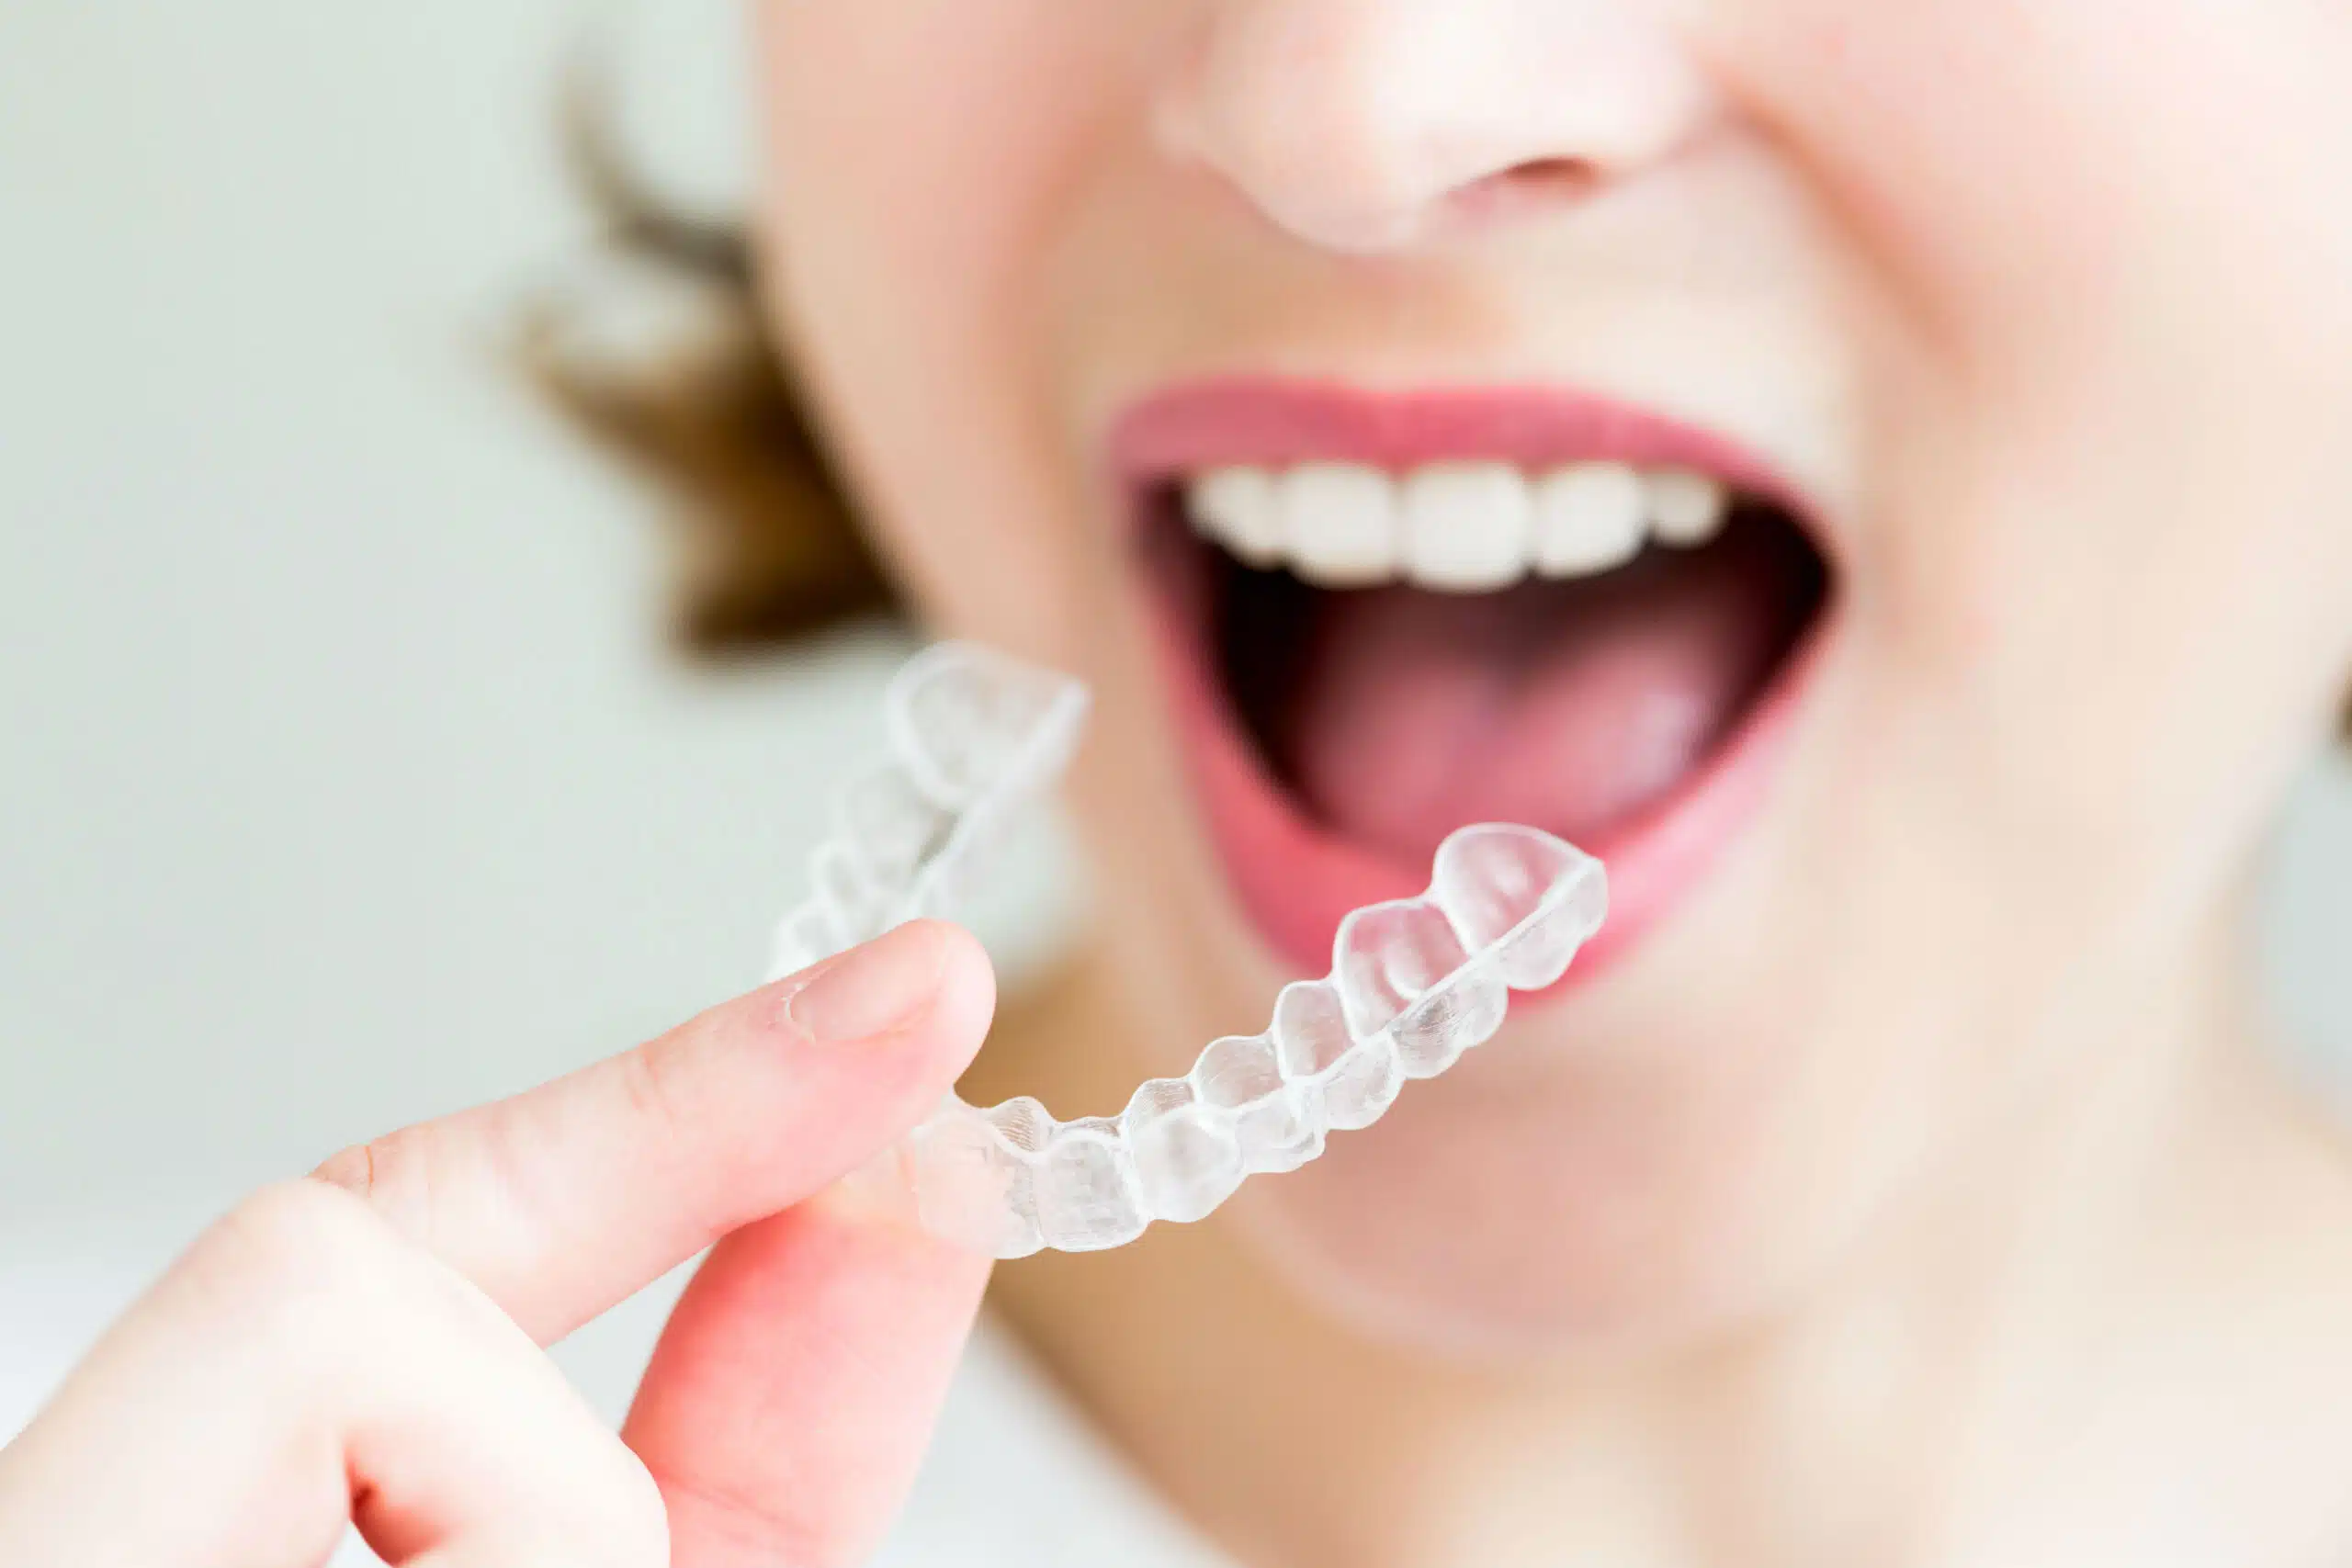 Invisalign for Adults